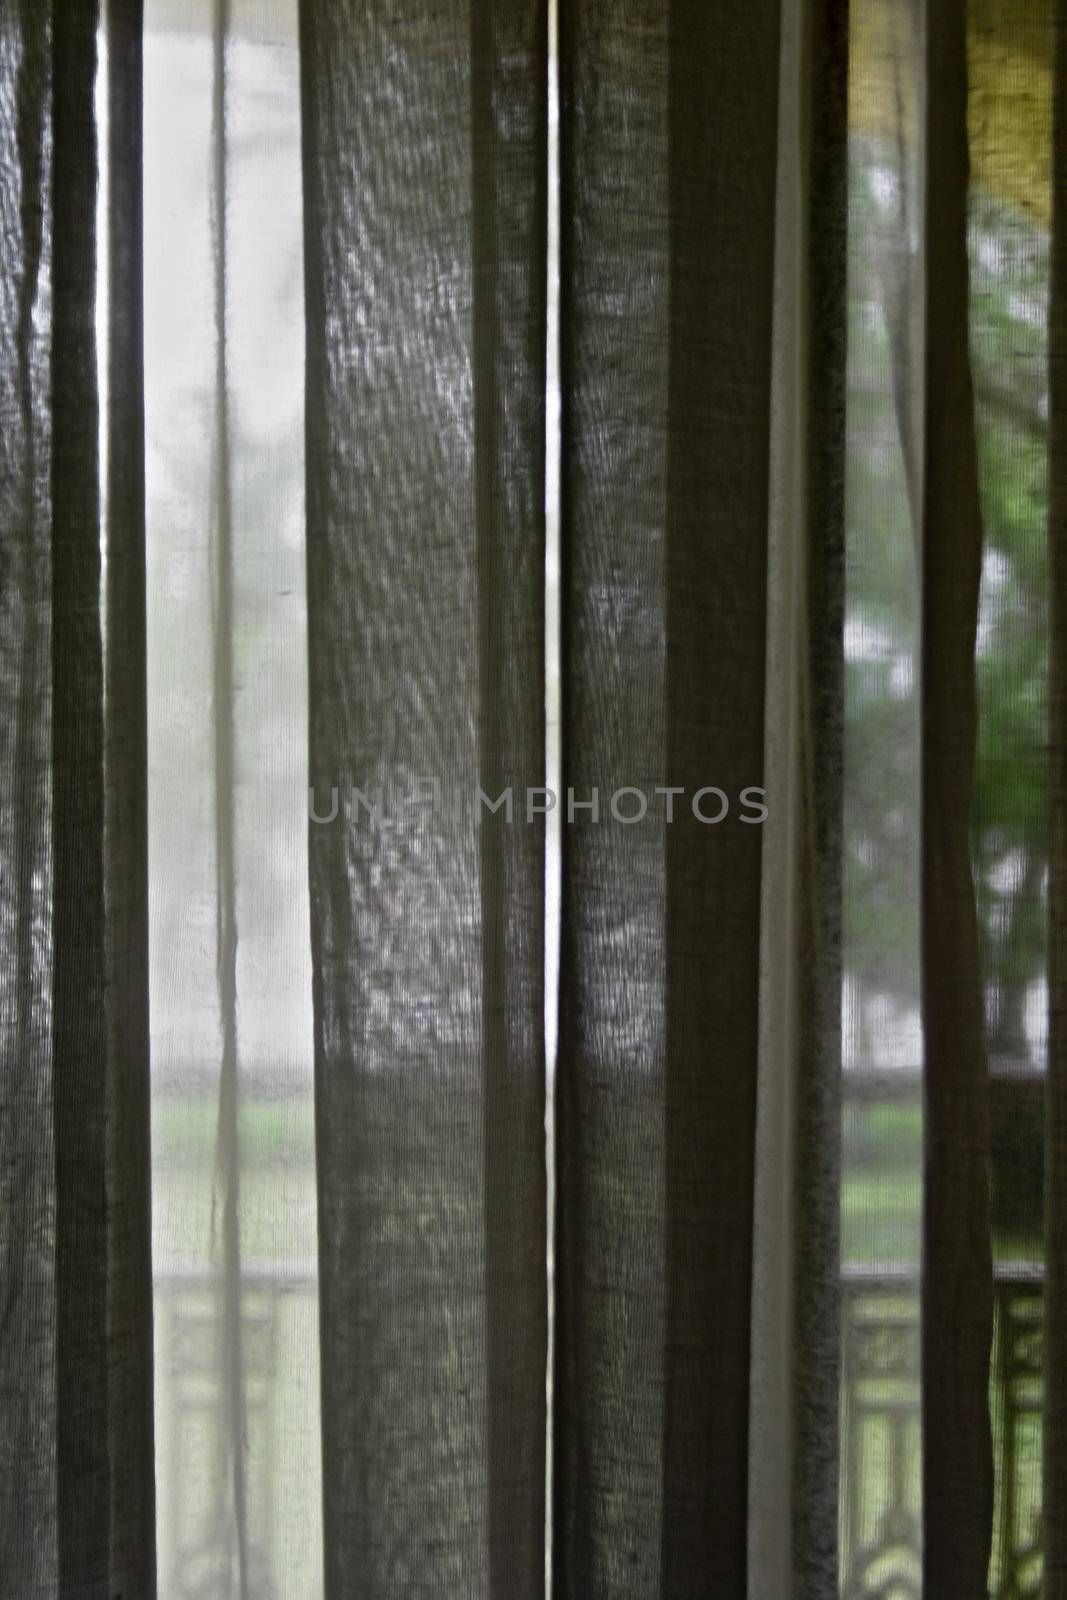 A generic portrait of laced curtain patio doors looking out onto mature lawned gardens, lawns, trees and a lake, may be located anywhere in the world